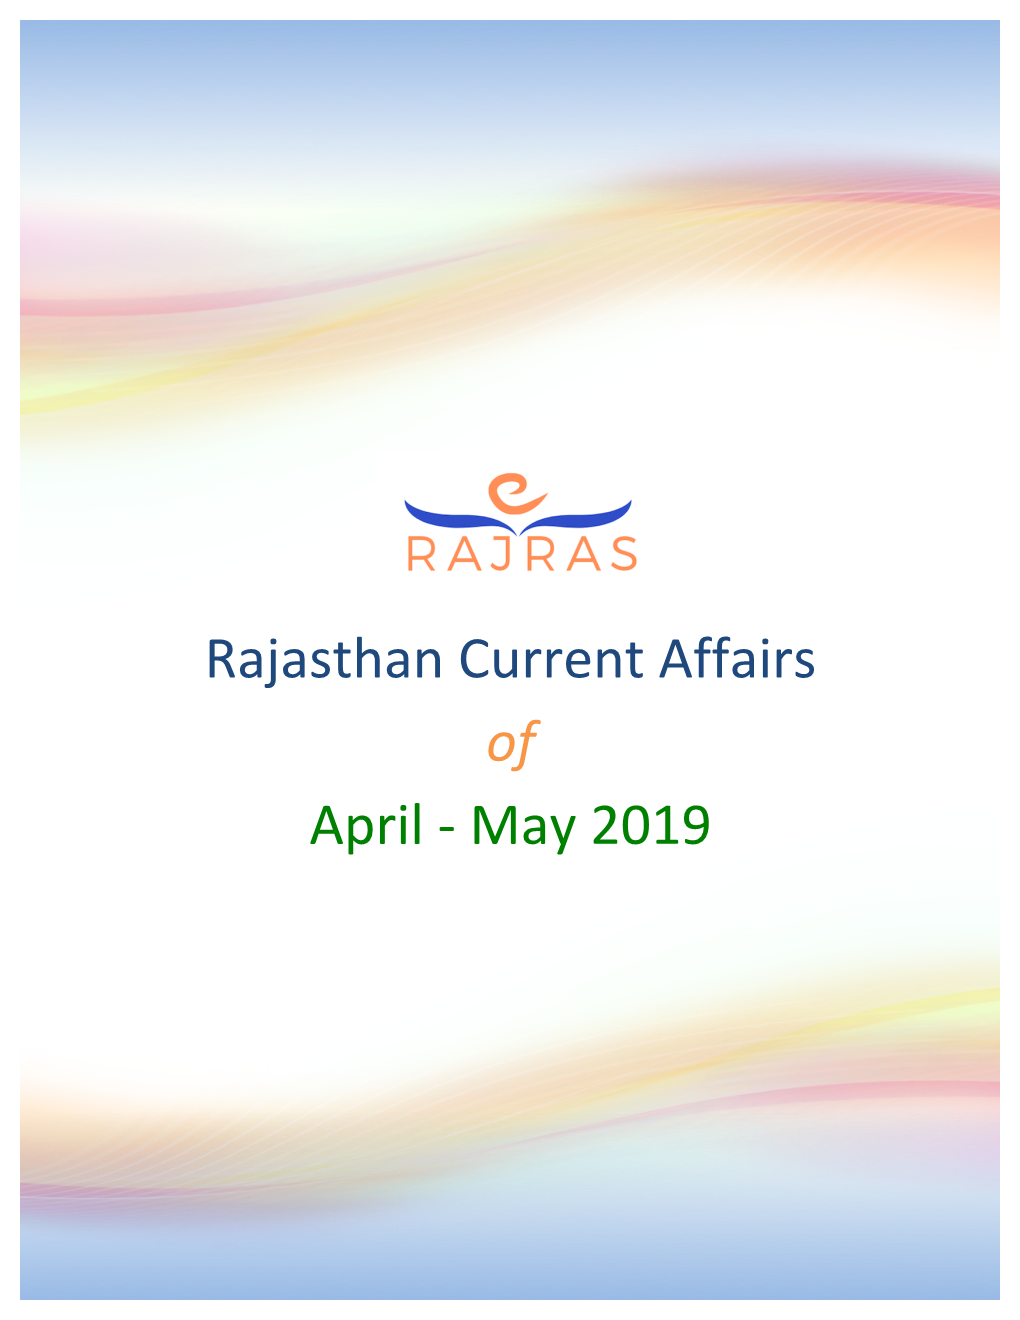 Rajasthan Current Affairs of April - May 2019